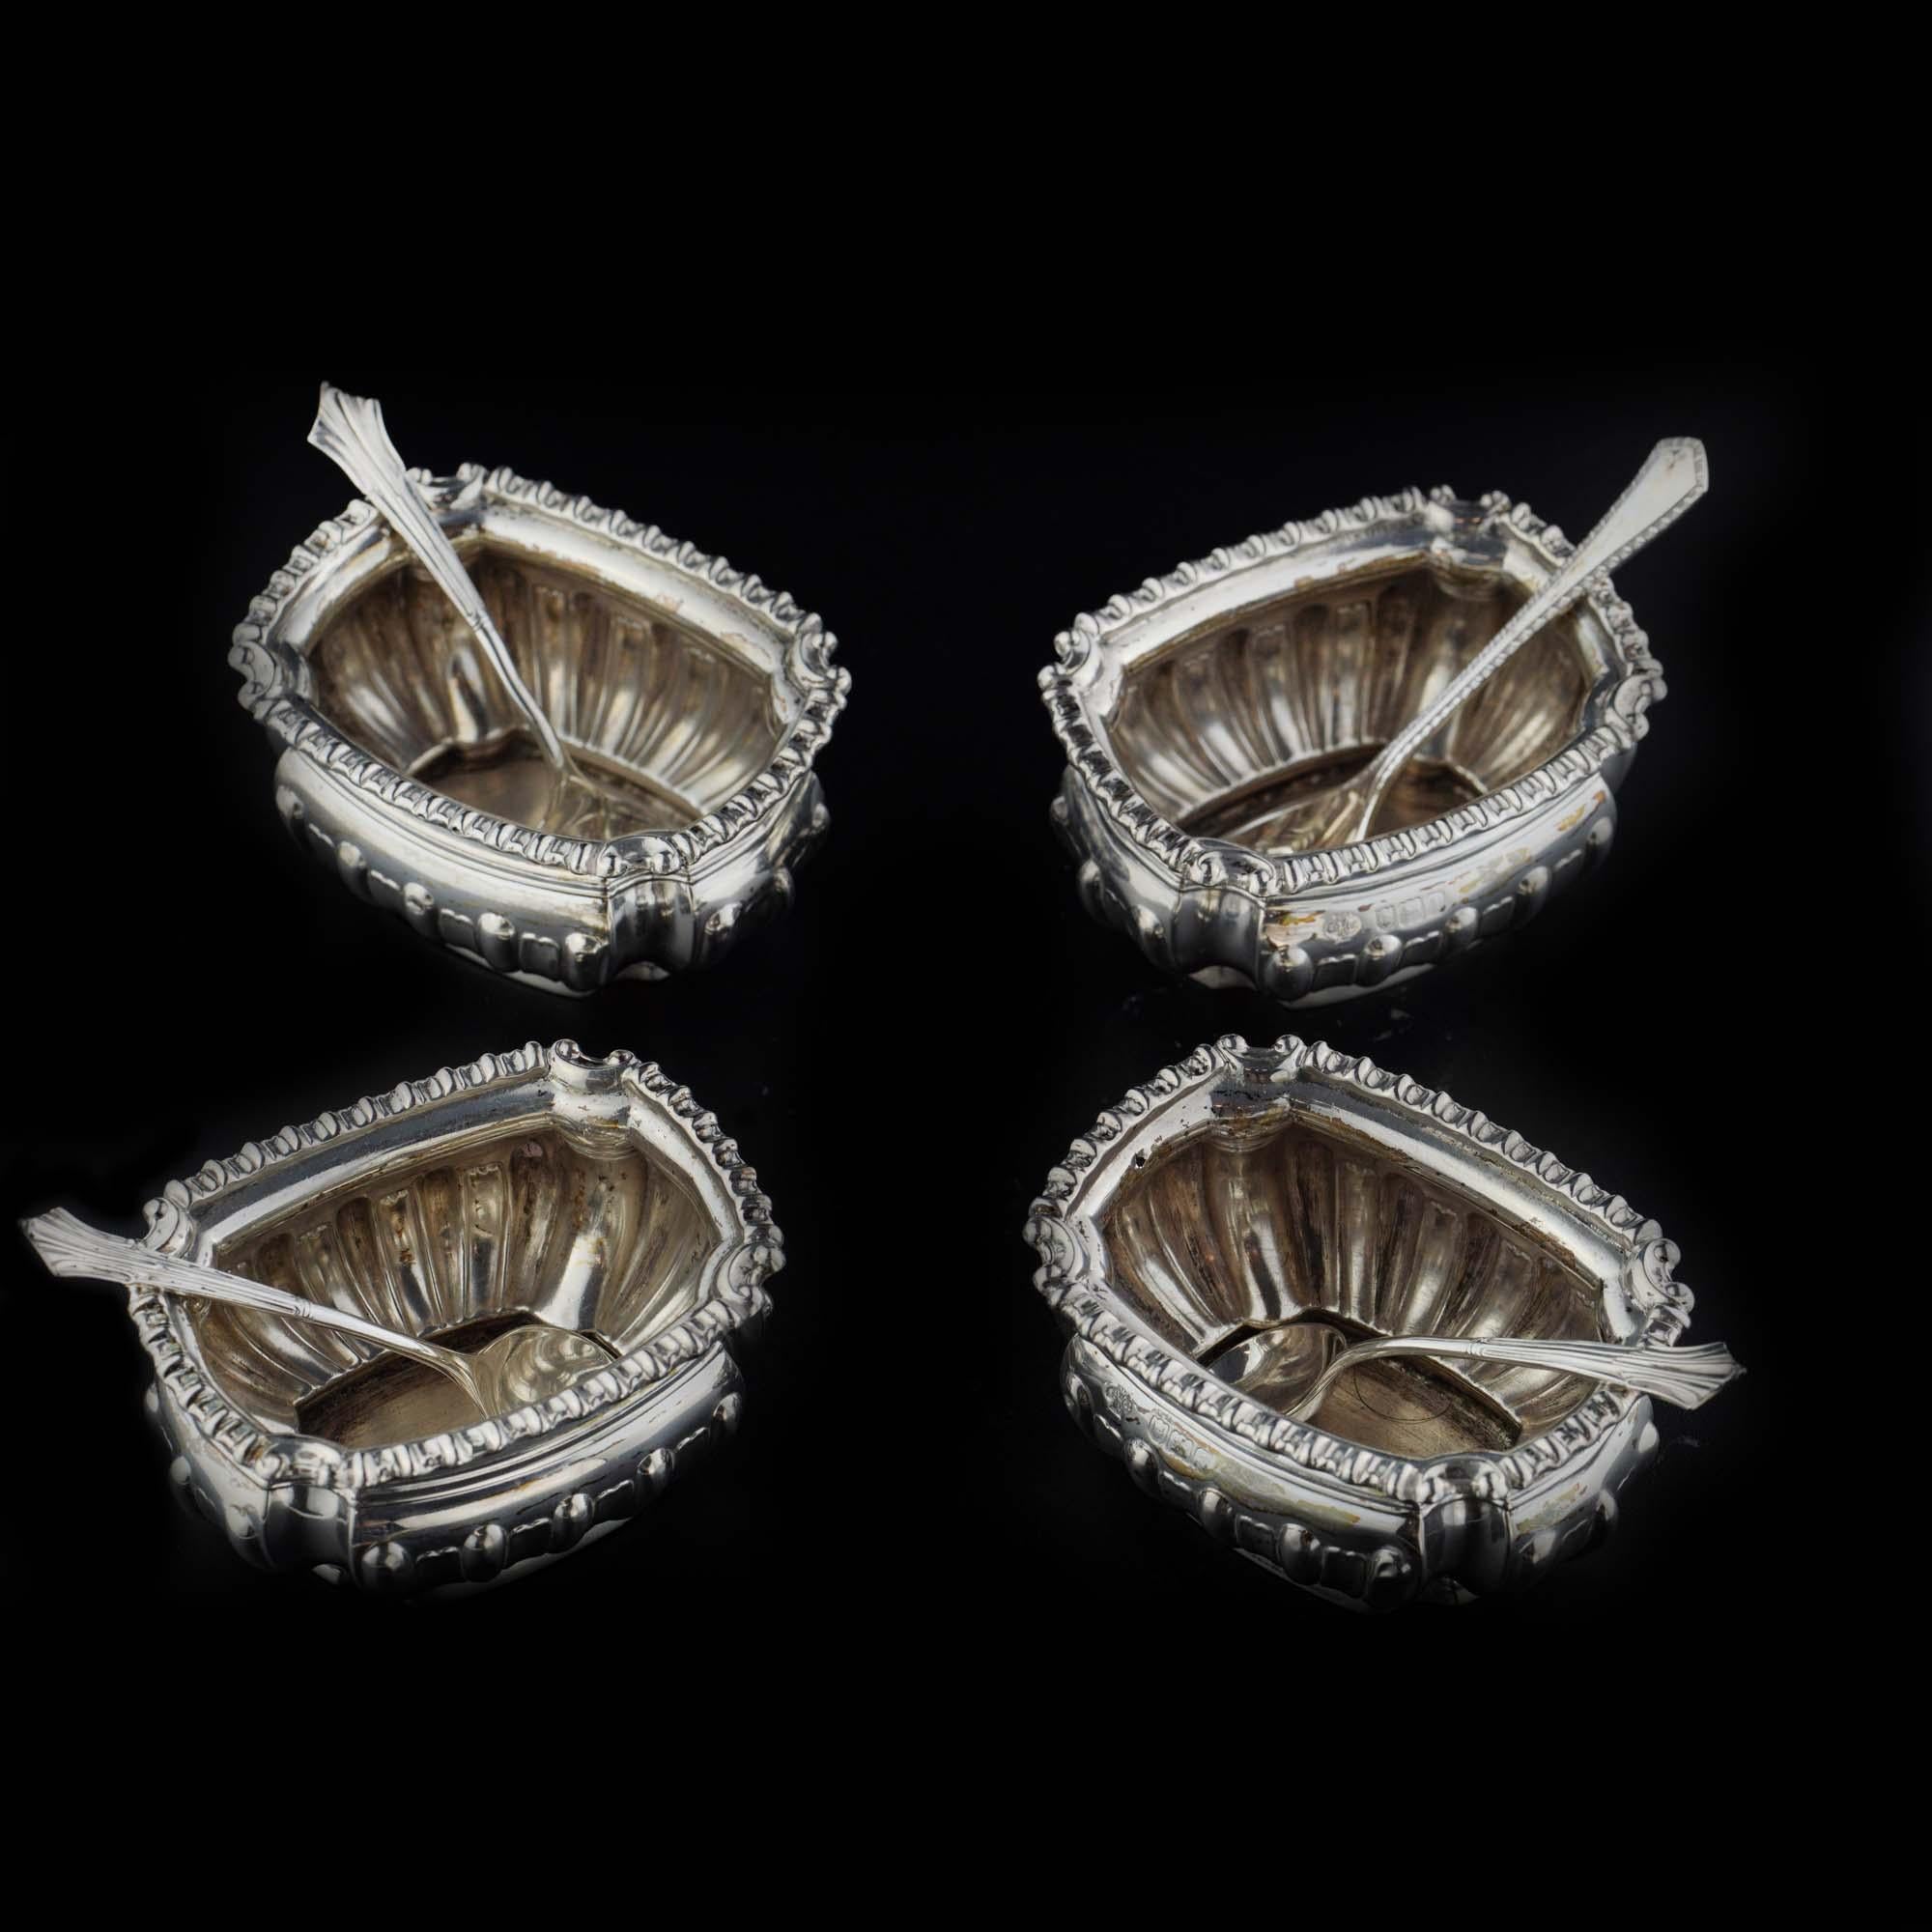 Antique Edwardian sterling silver set of 4 chased salt cellars with spoons. 
Maker: William Hutton & Sons Ltd.
Made in England, London, 1906
Fully hallmarked.

Approx. dimensions :
Length x width x height: 6.5 x 5 x 3 cm 
Total weight: 157